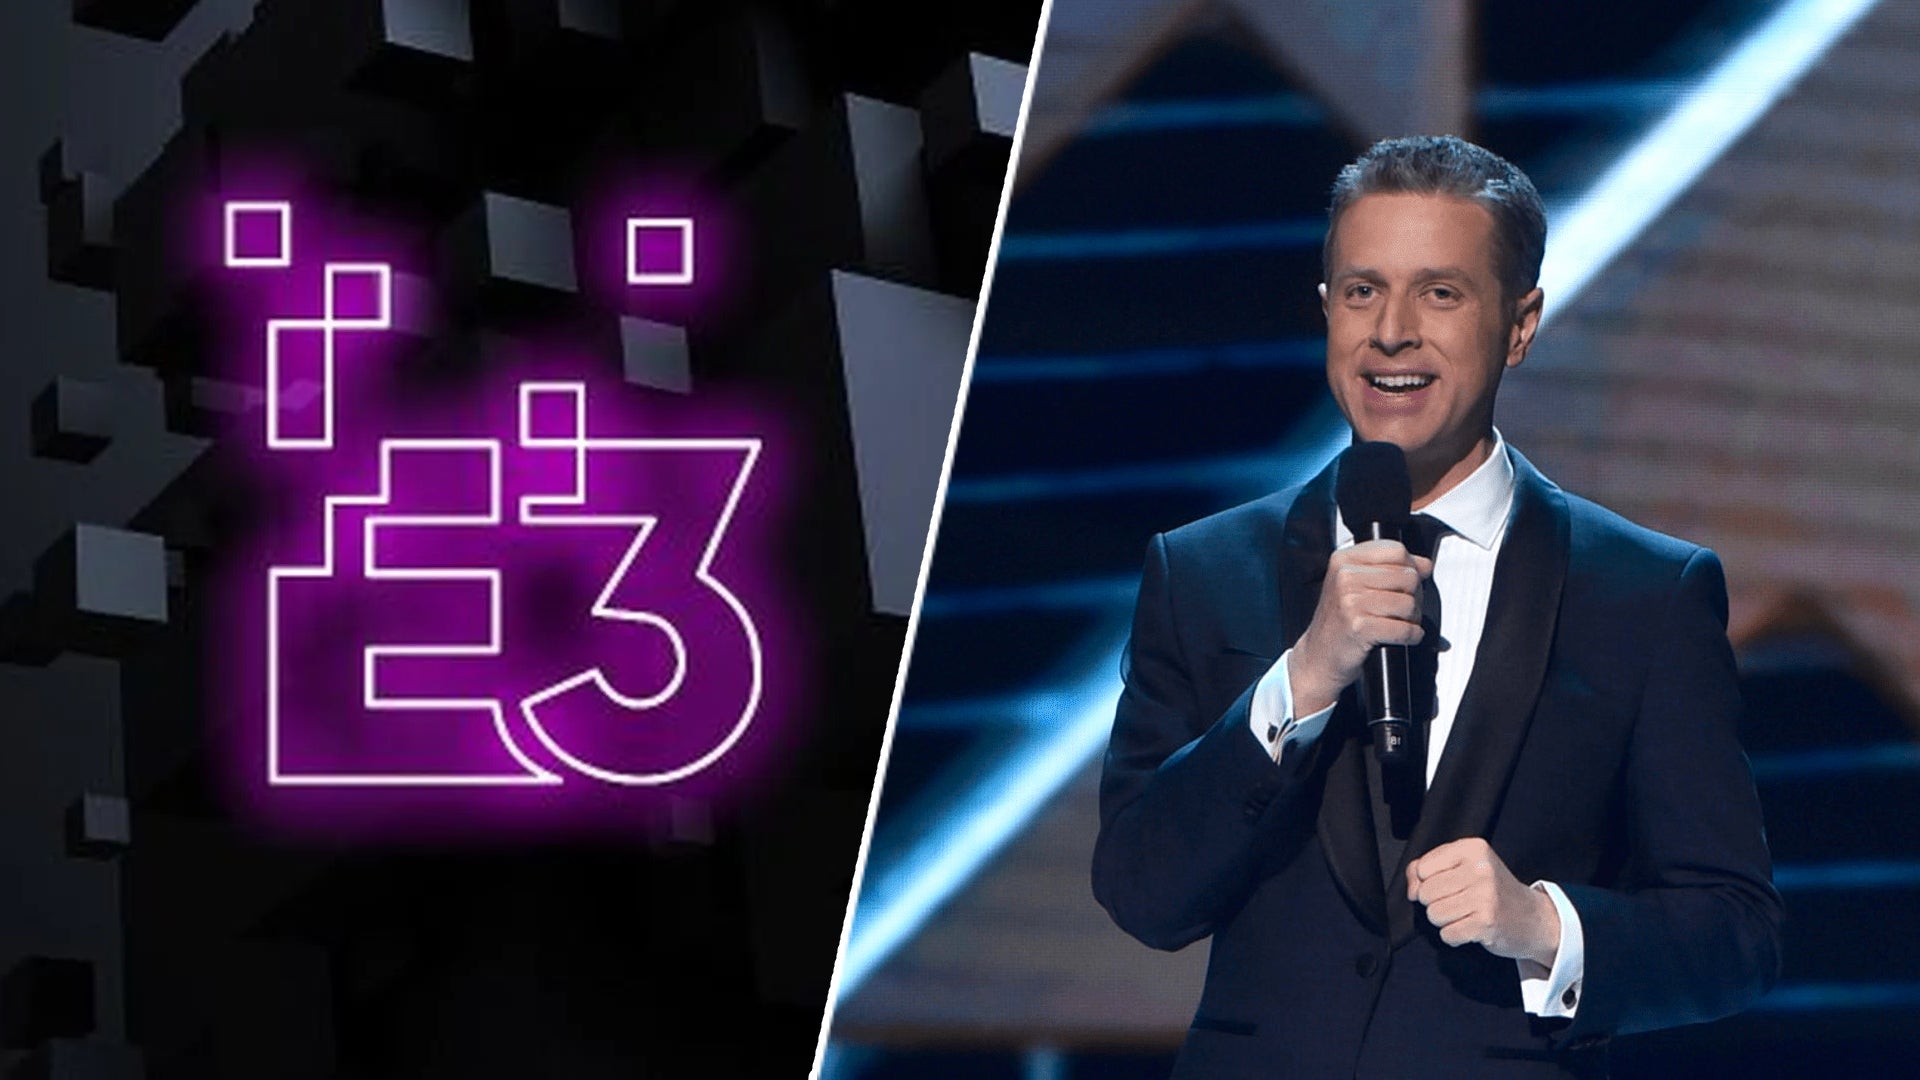 Image for E3 2022 is cancelled, but Geoff Keighley will still deliver the adverts